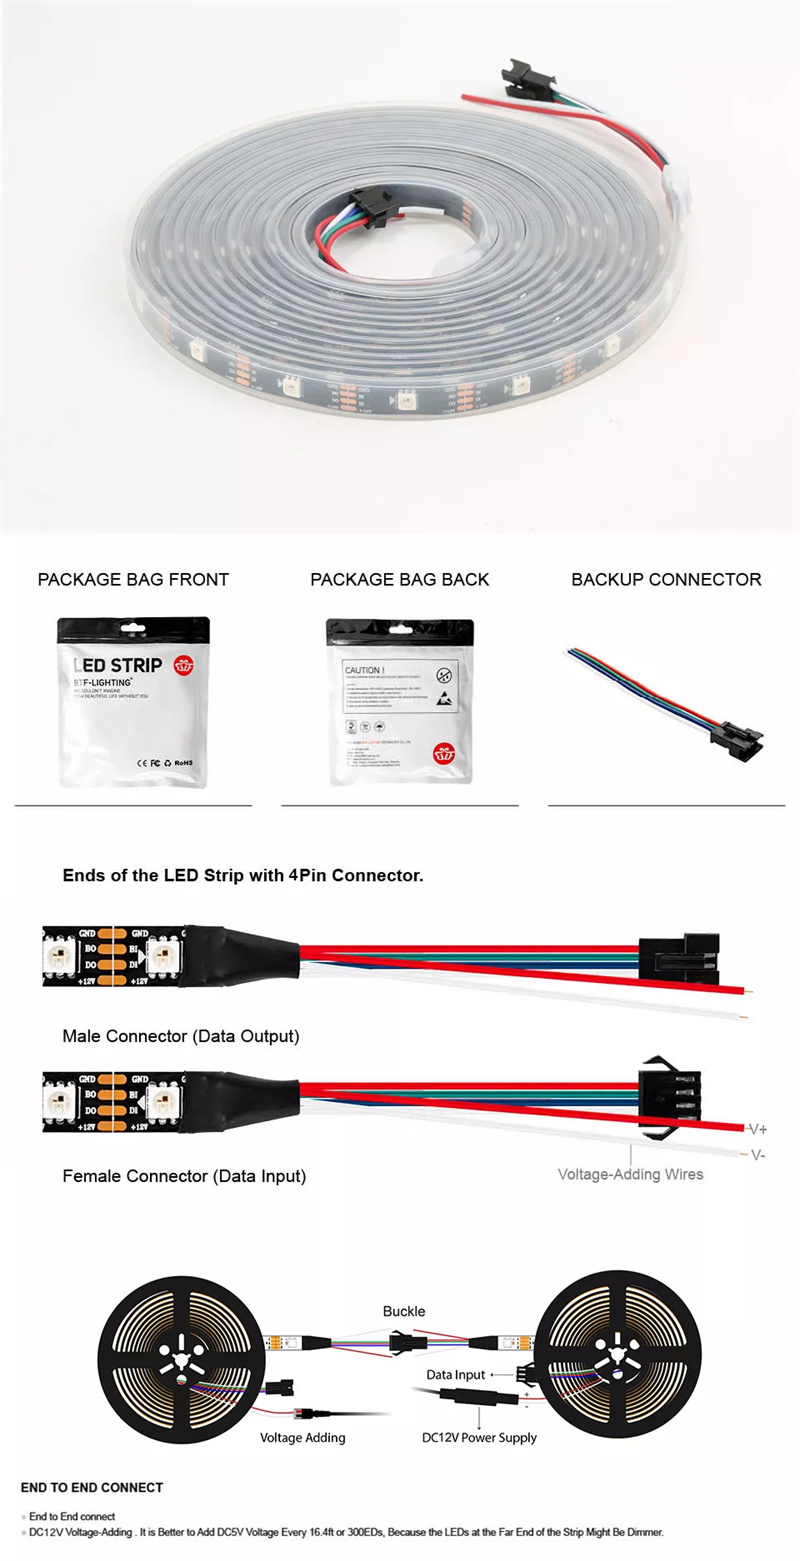 WS2815 LED Strip Connect | Digital individually Addressable RGB 12v WS2815 LED Strip Resume from Break Point